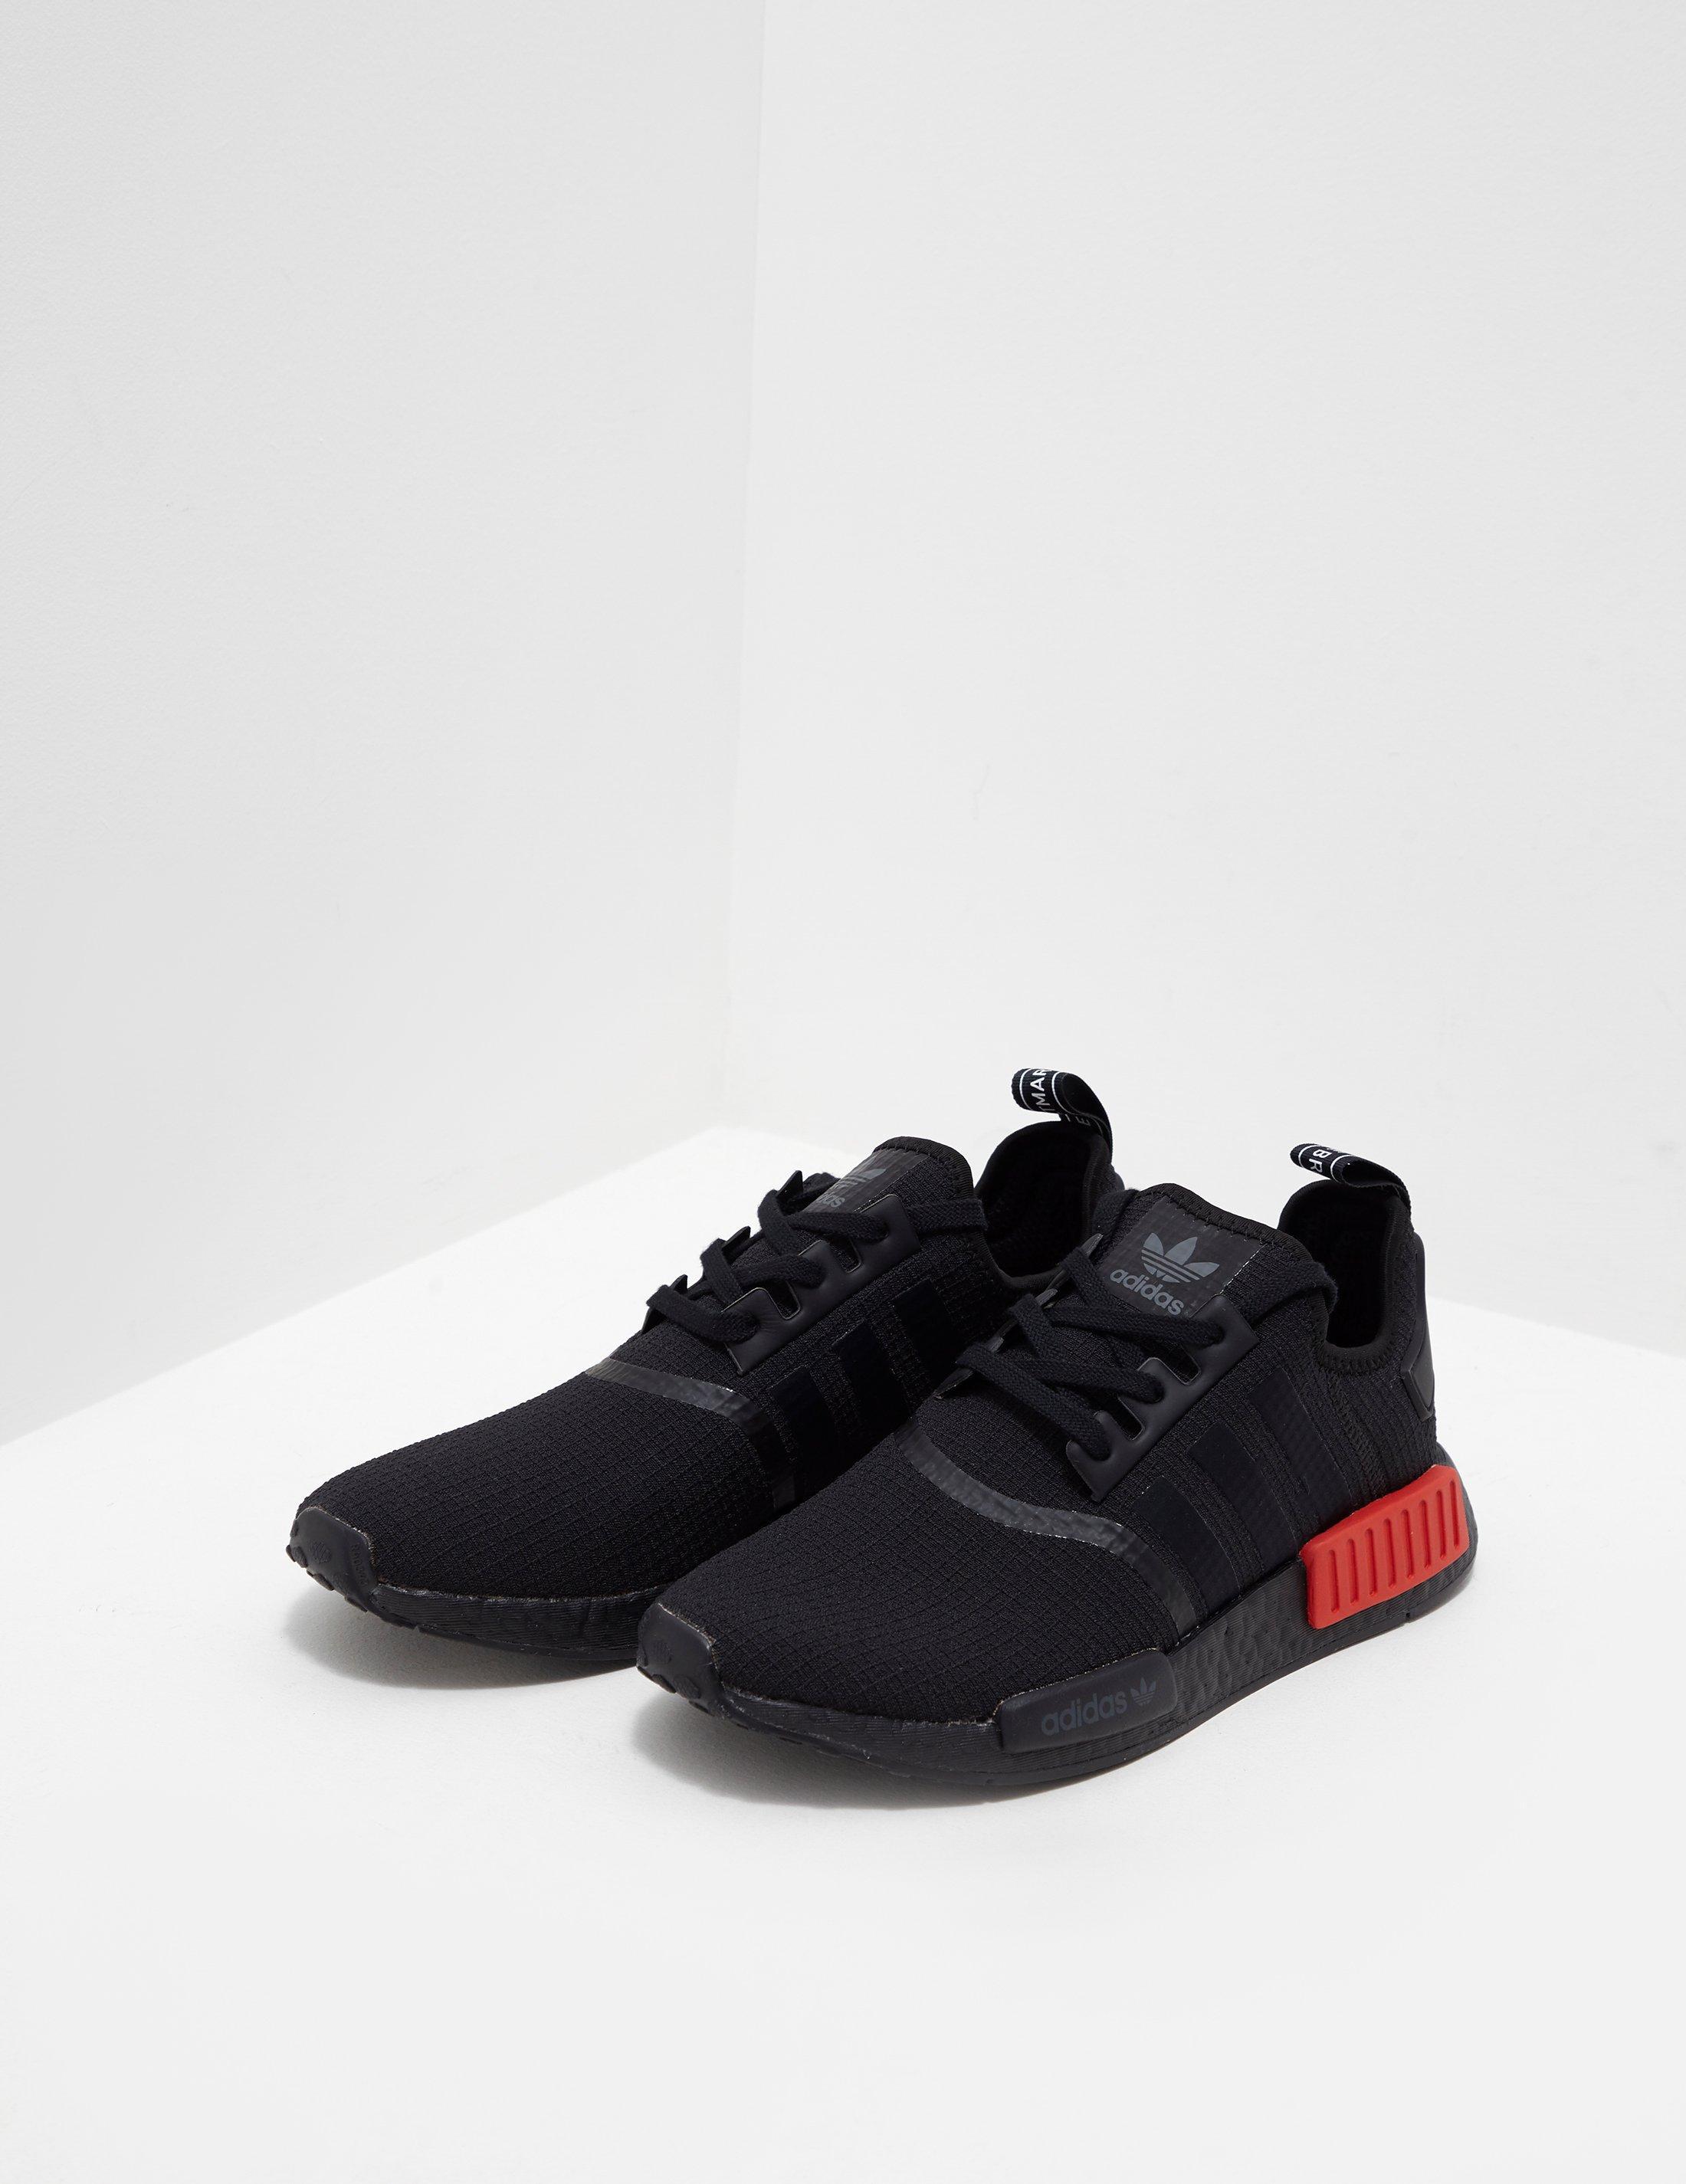 cheap nmds mens